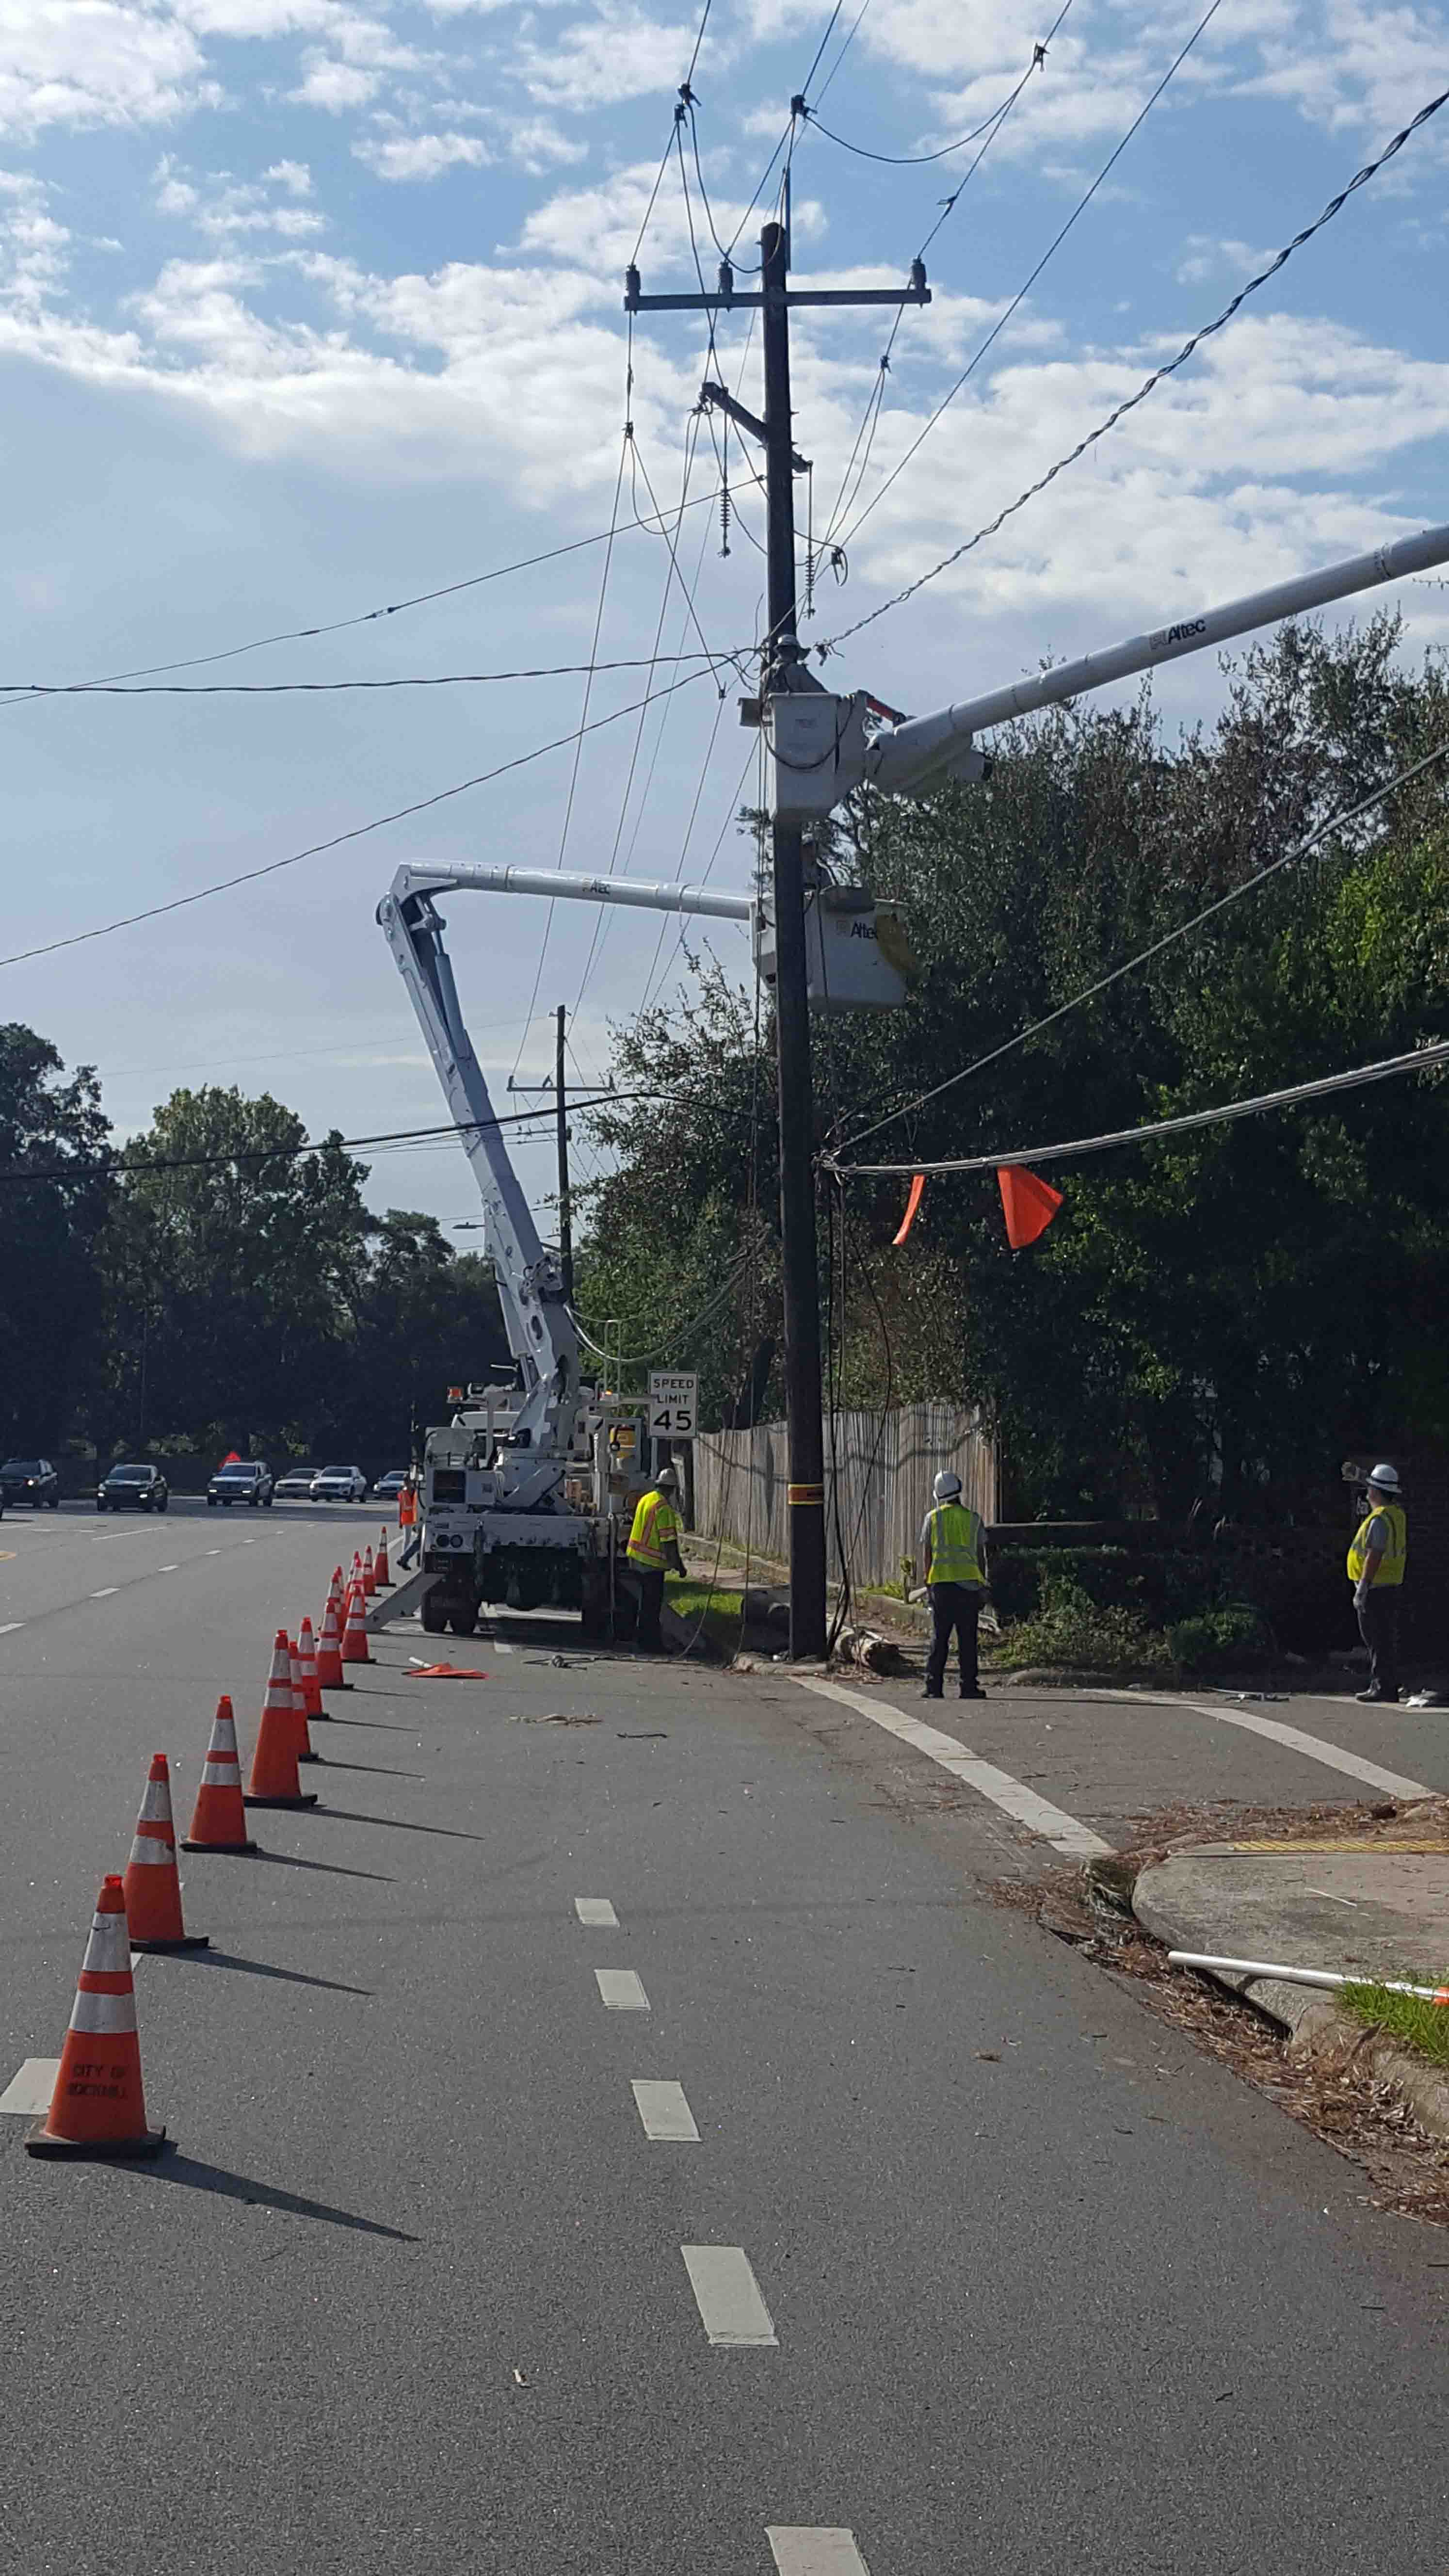 Electric linemen from the City of Rock Hill assisting Florida